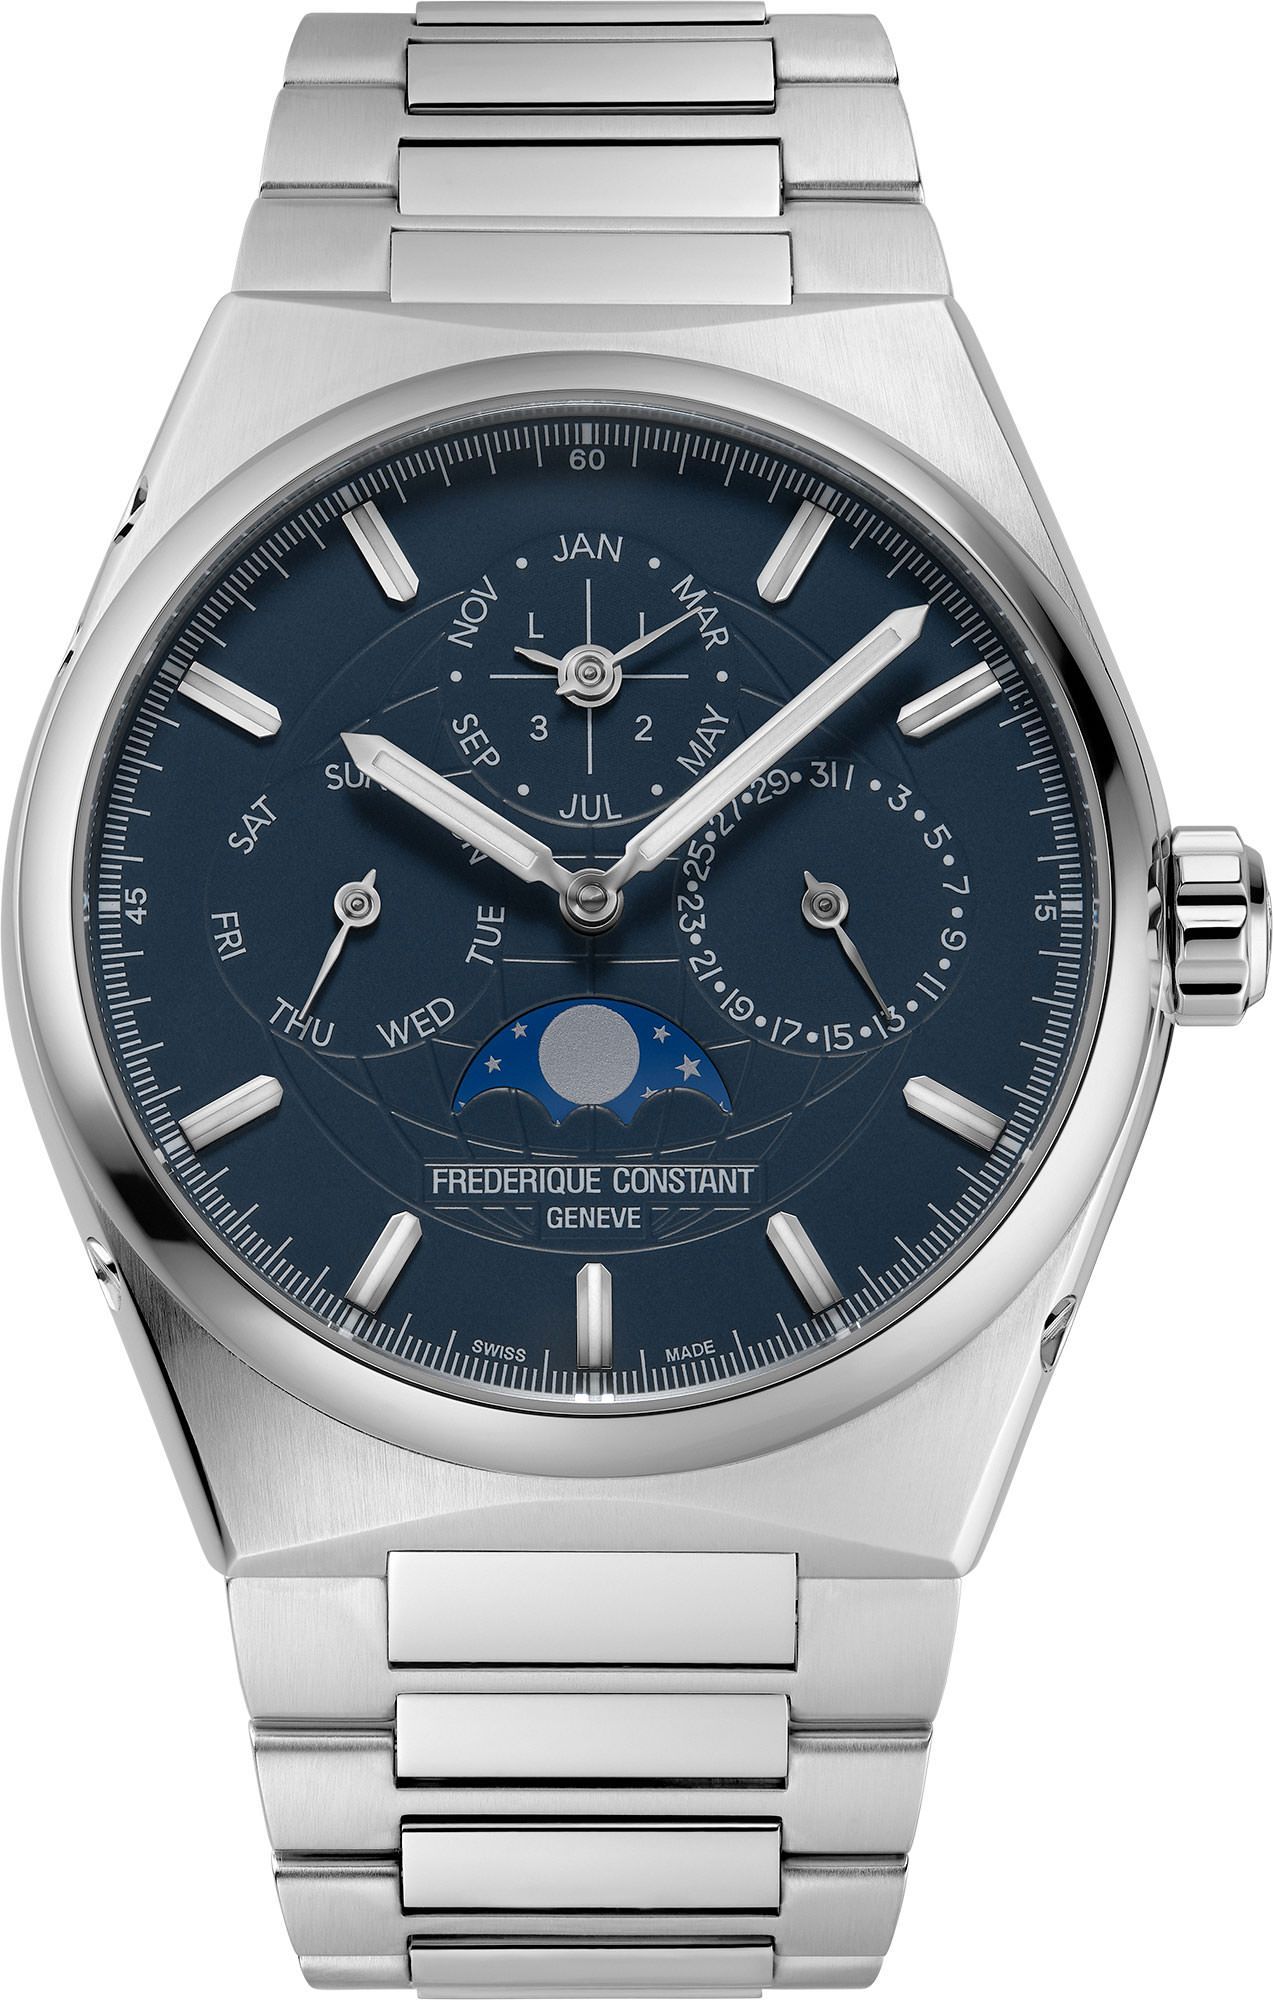 Frederique Constant Highlife Highlife Perpetual Calendar Manufacture Blue Dial 41 mm Automatic Watch For Men - 1